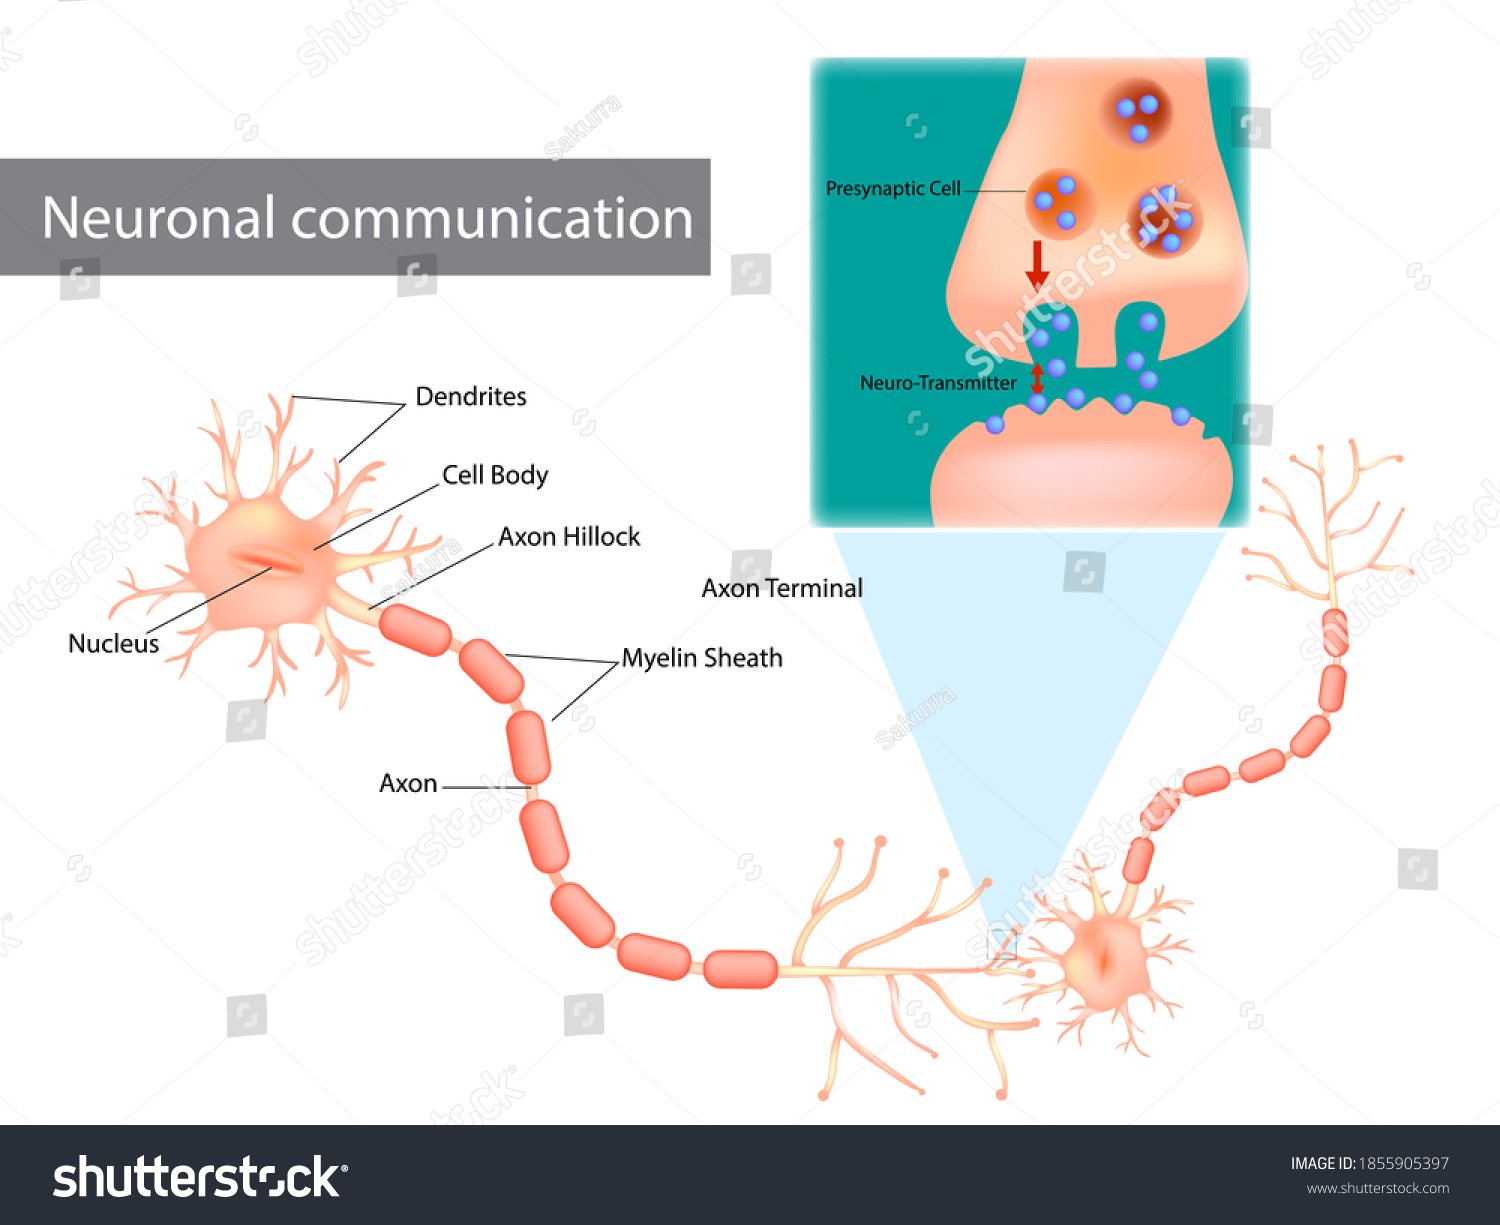 SVG of Neuronal communication. The dendrites contain receptors for neurotransmitters released by nearby neurons. Soma, dendrites, axons, terminal buttons, and synaptic vesicles. svg